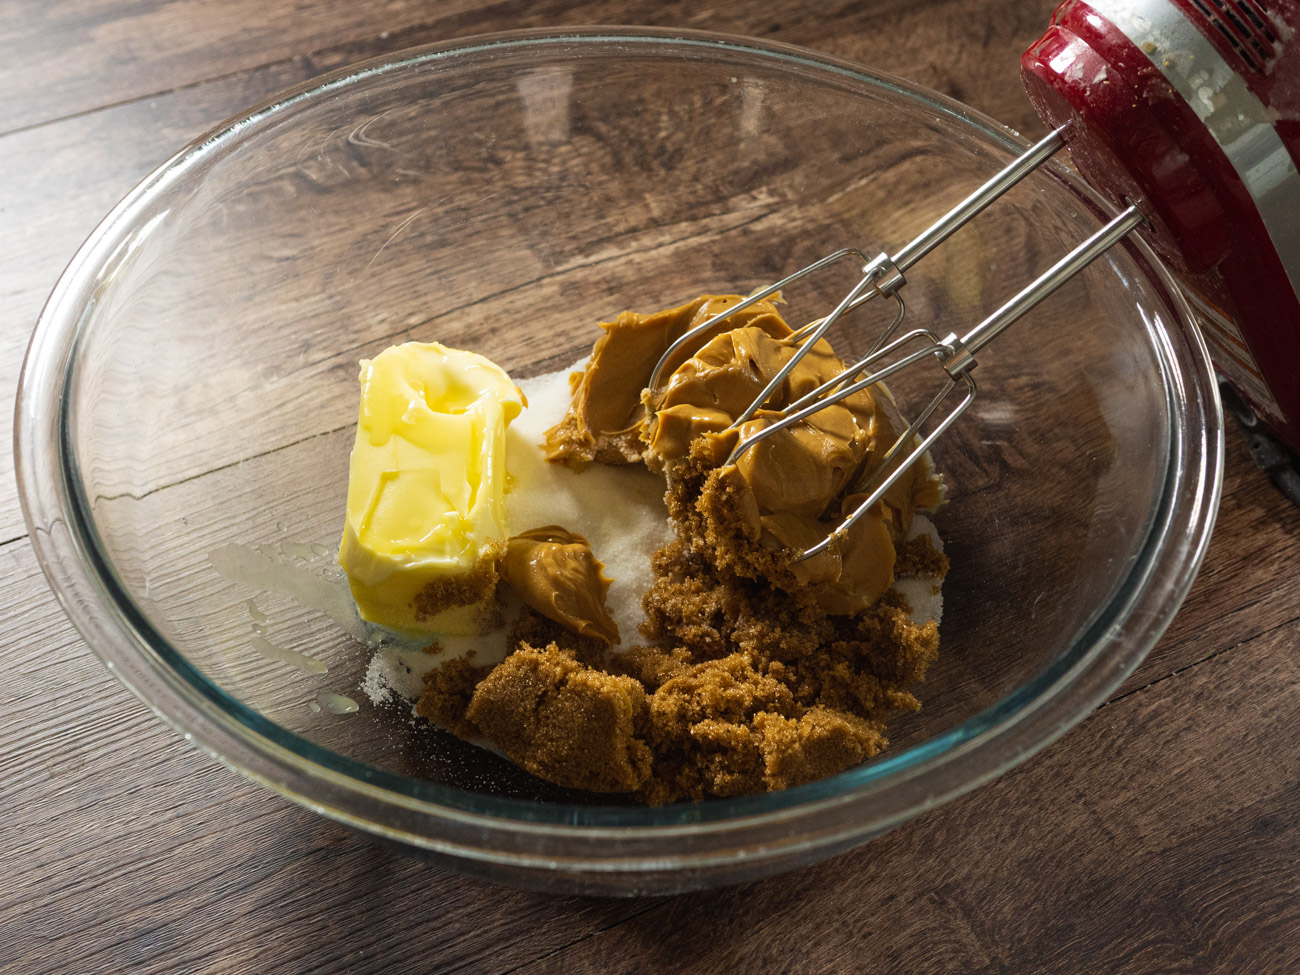 In a large bowl cream together the white and brown sugar with the butter and also the creamy peanut butter using an electric mixer. Add eggs one at a time, followed by the vanilla.